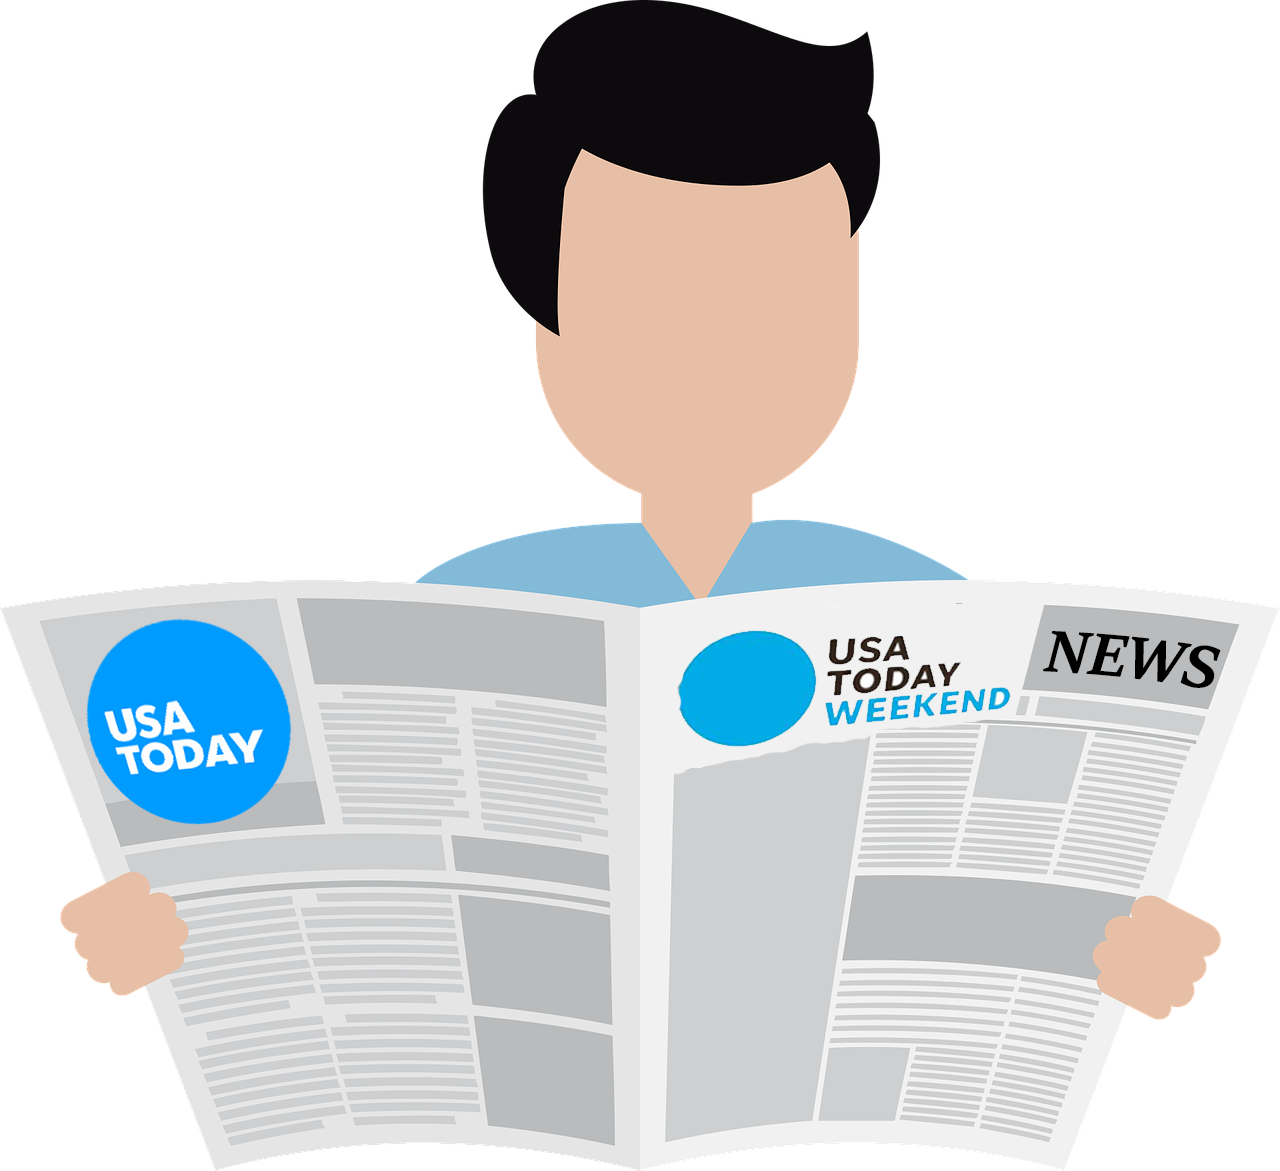 Login now with your library card! [image of person Reading USA Today newspaper] 